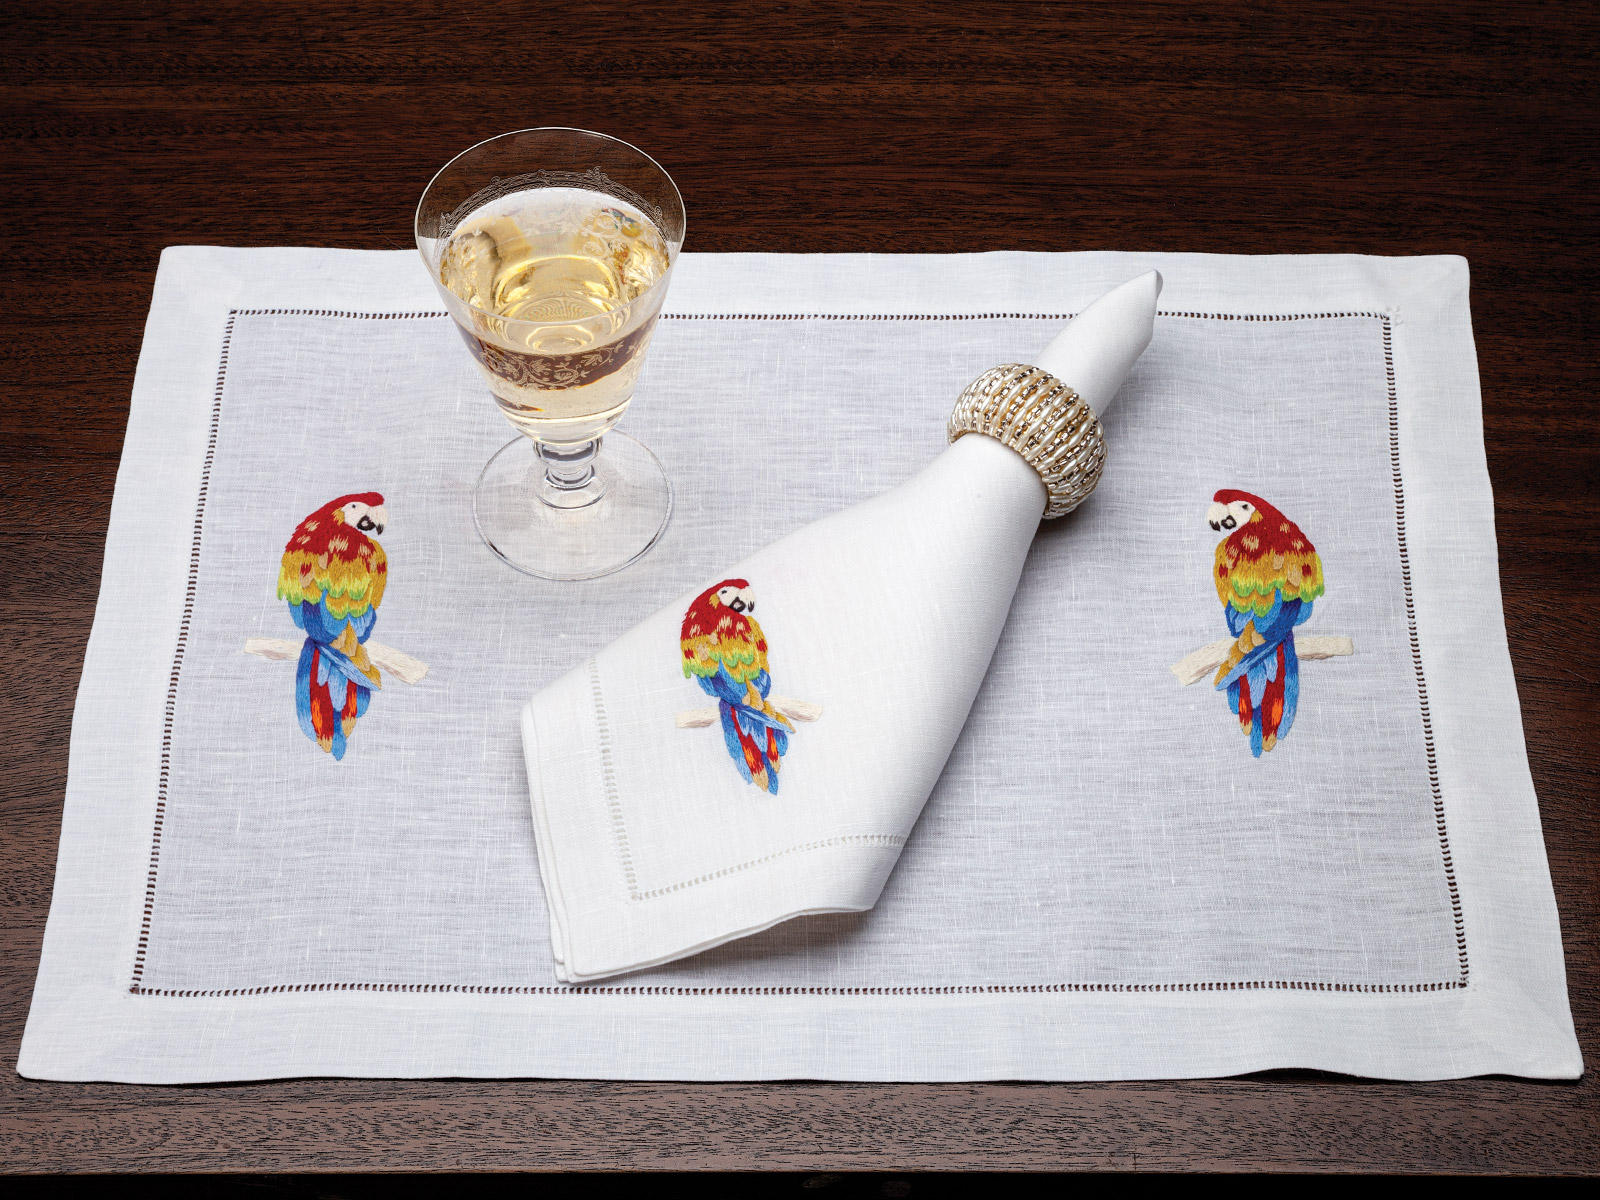 Avian Parrot-themed Placemats & Napkins: 4 of each.